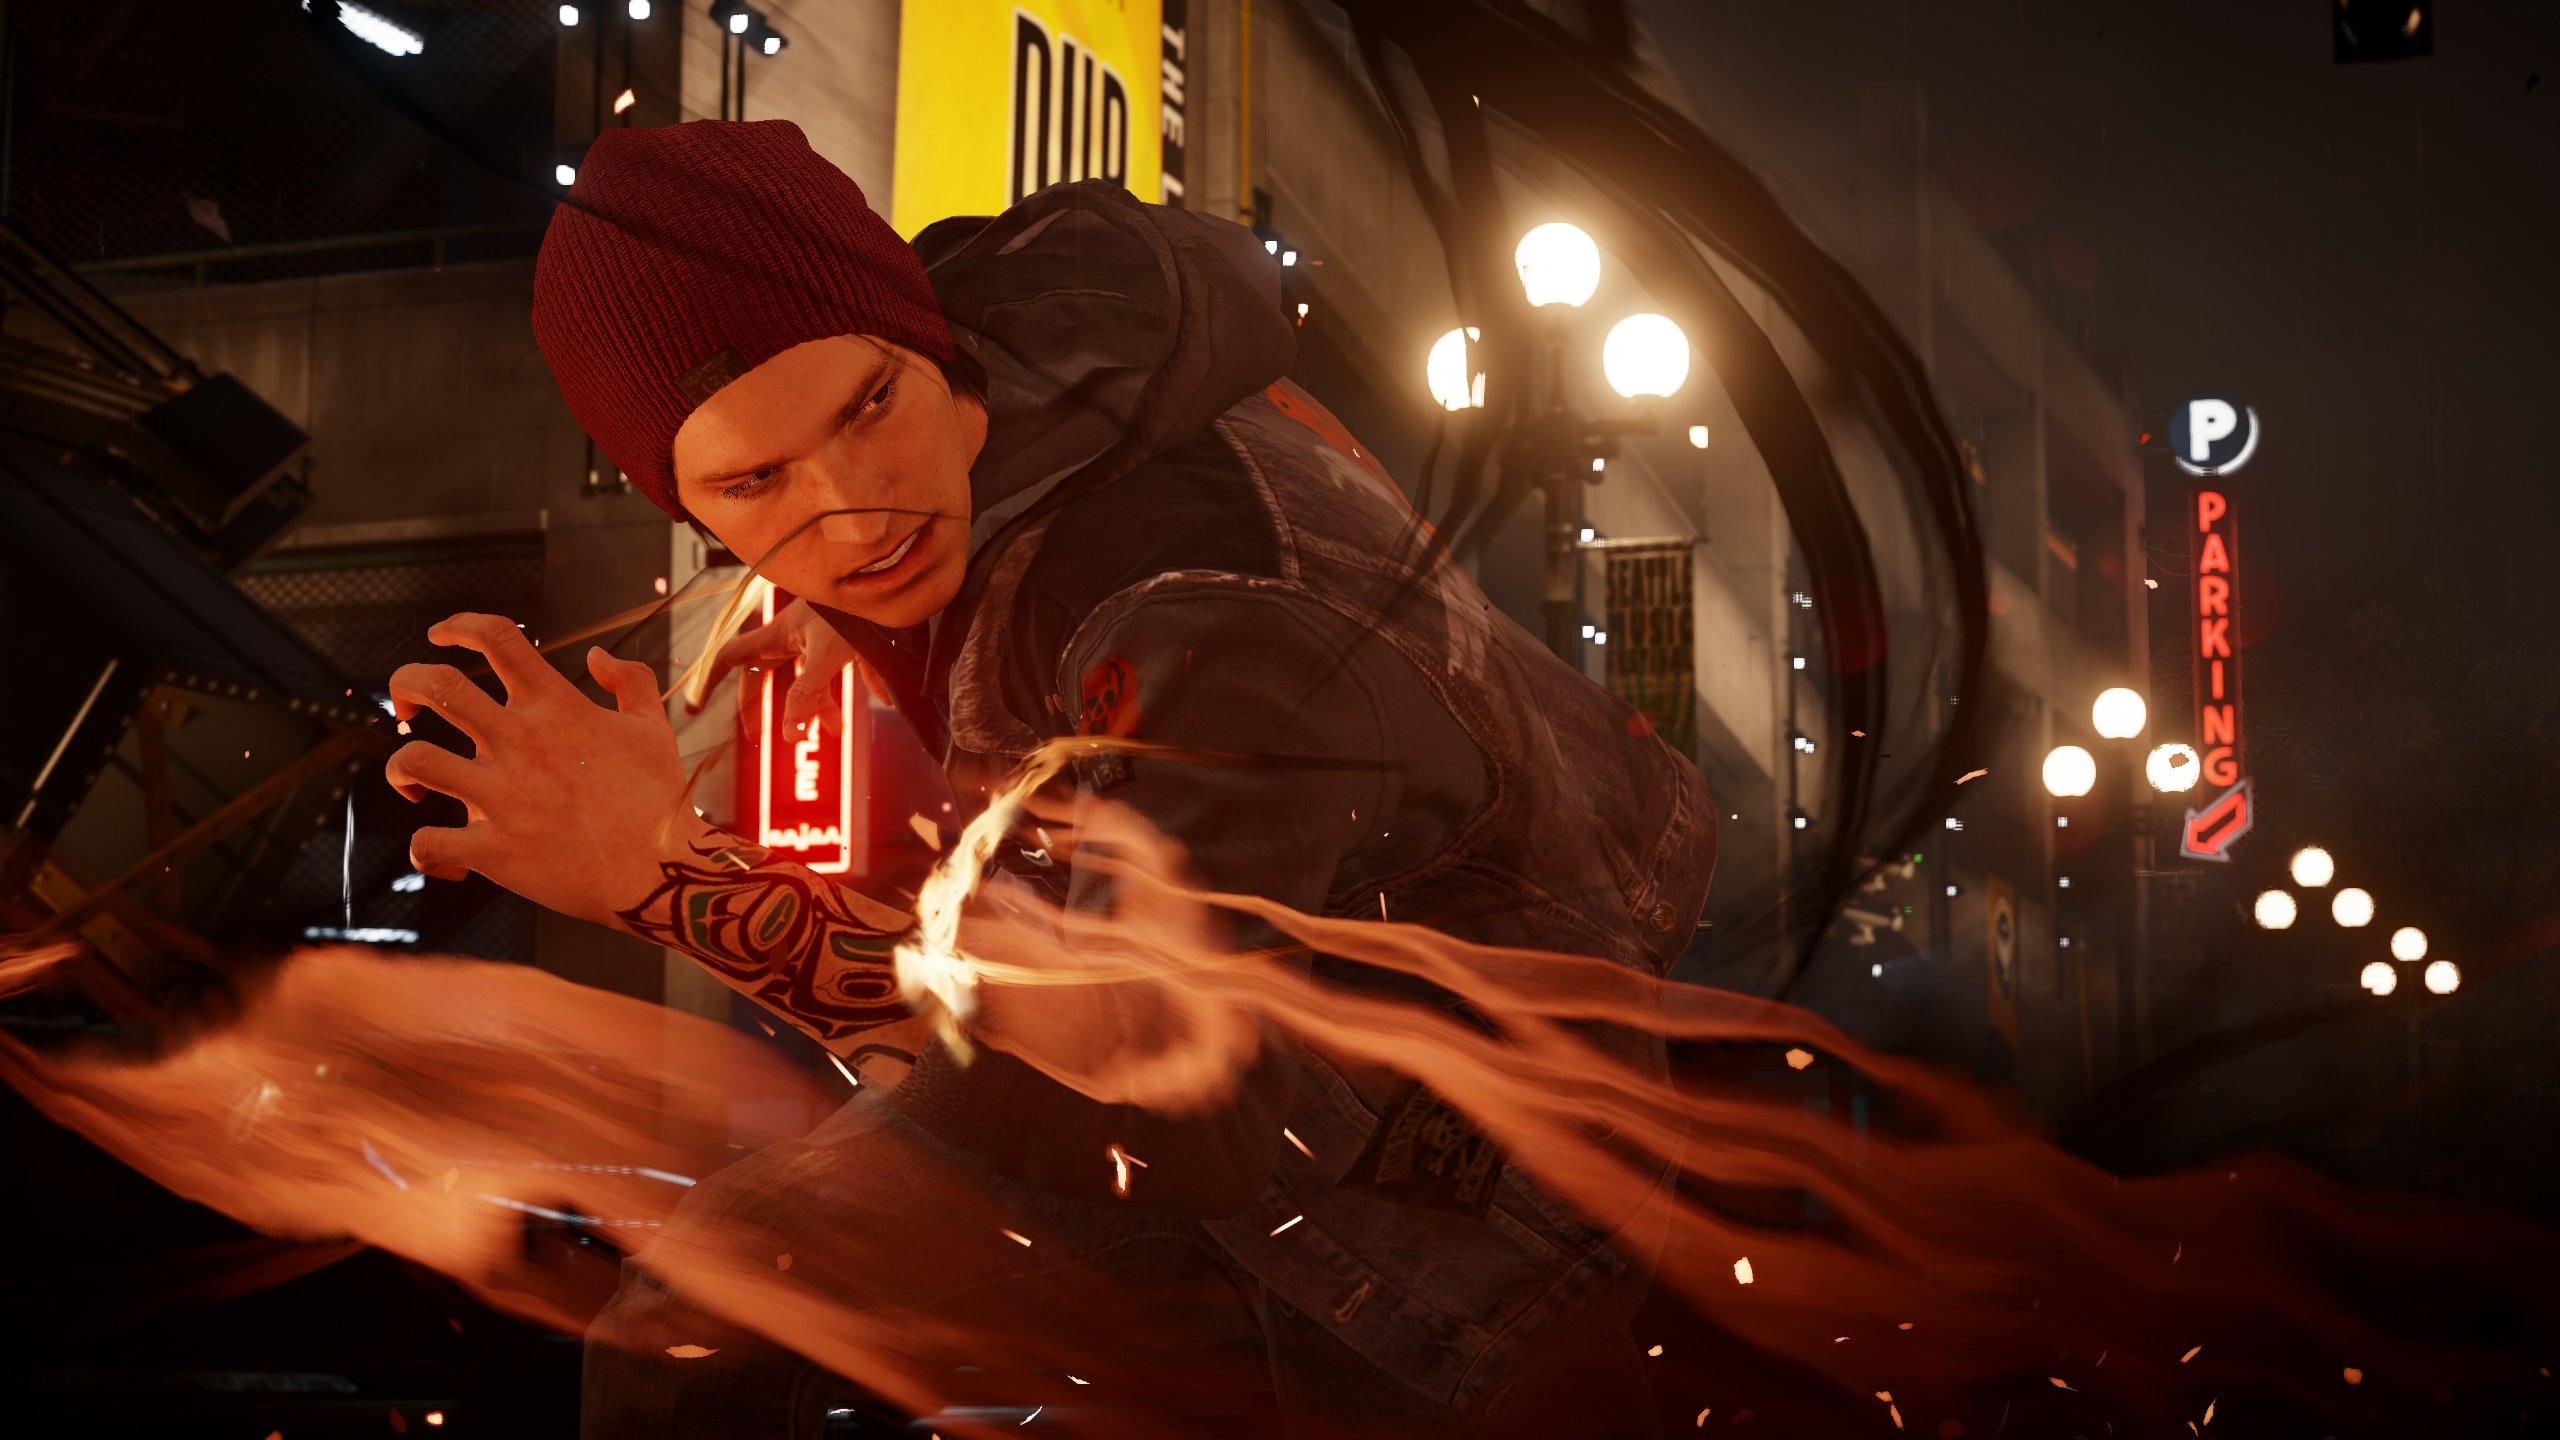 inFAMOUS: Second Son, Gaming deals, Best price, Online shopping, 2560x1440 HD Desktop